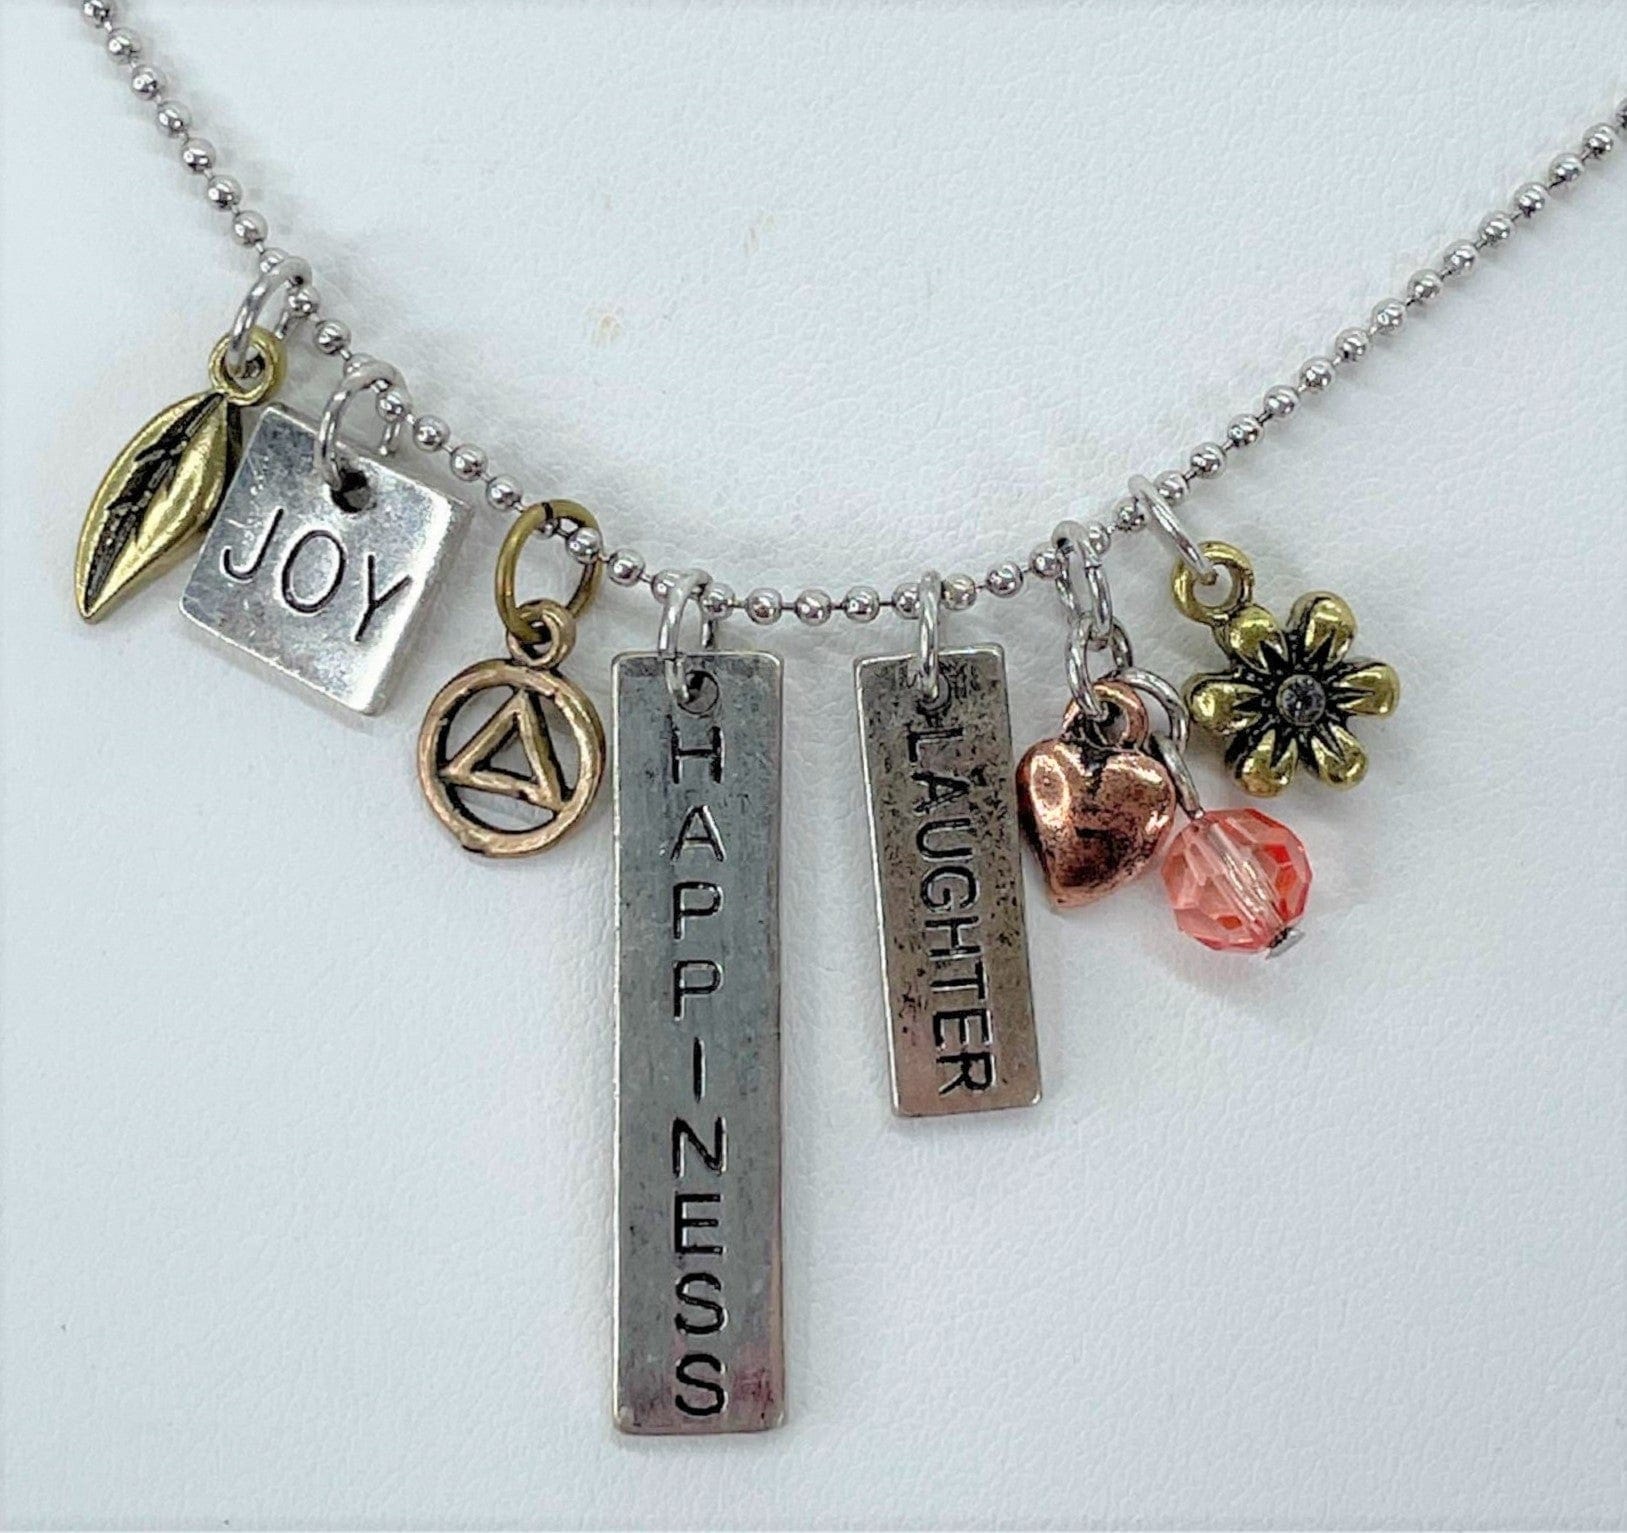 Alcoholics Anonymous "Joy-Happiness-Laughter" Bar Necklace By Recovery Matters